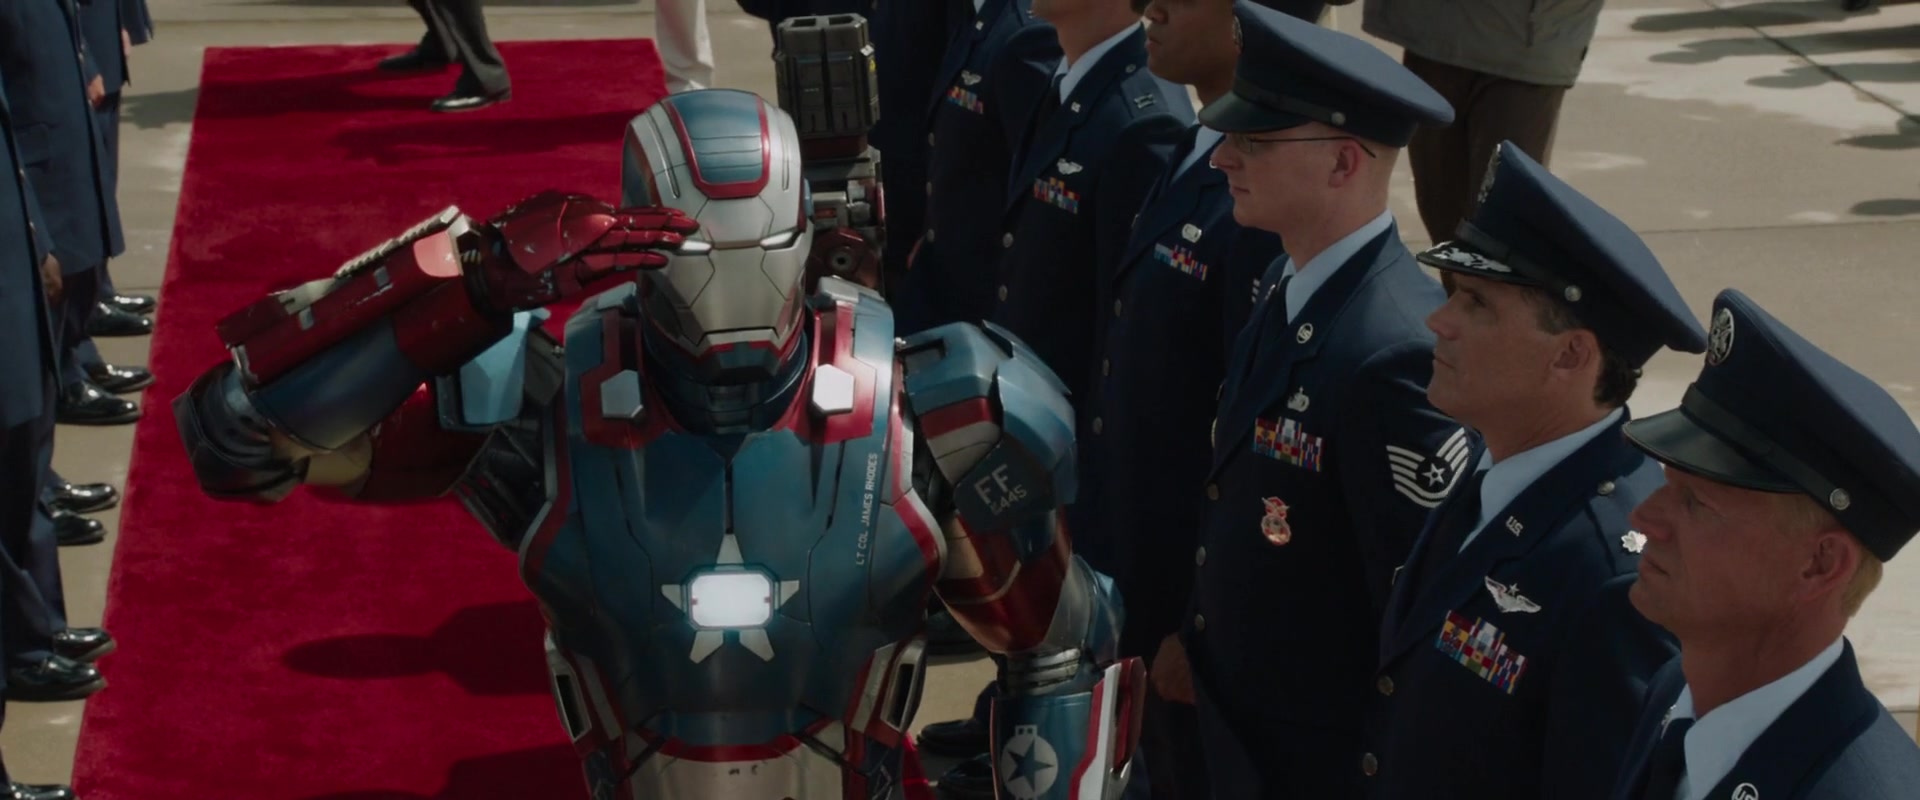 The Iron Patriot (Don Cheadle) greets the President of the United States in Iron Man 3 (2013), Marvel Entertainment